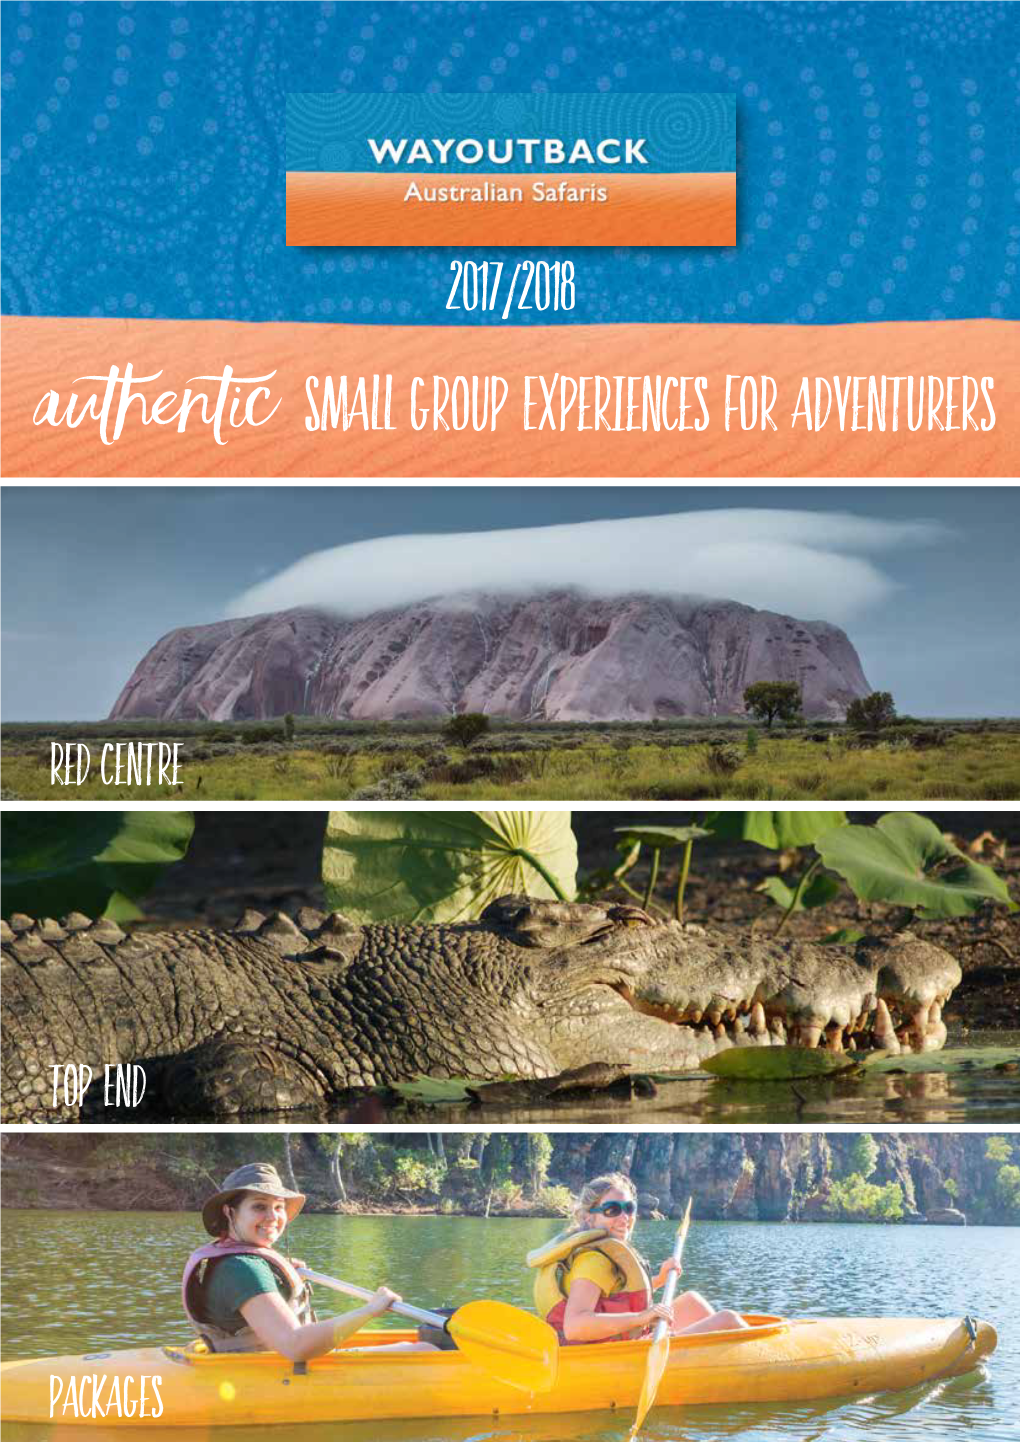 Authentic Small Group Experiences for Adventurers